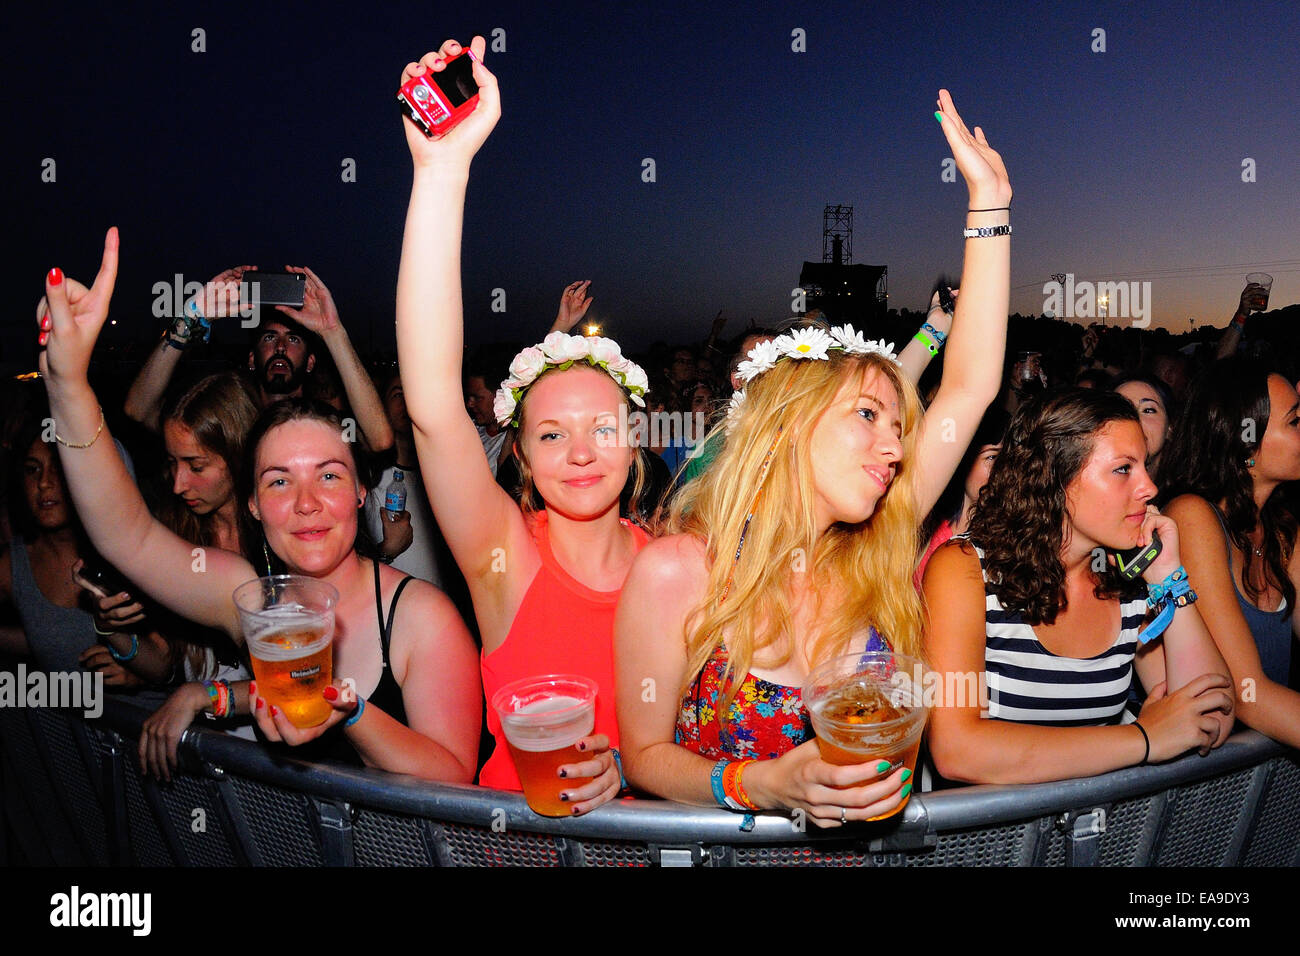 BENICASSIM, SPAIN - JULY 18: Women from the audience dancing at FIB Festival on July 18, 2014 in Benicassim, Spain. Stock Photo